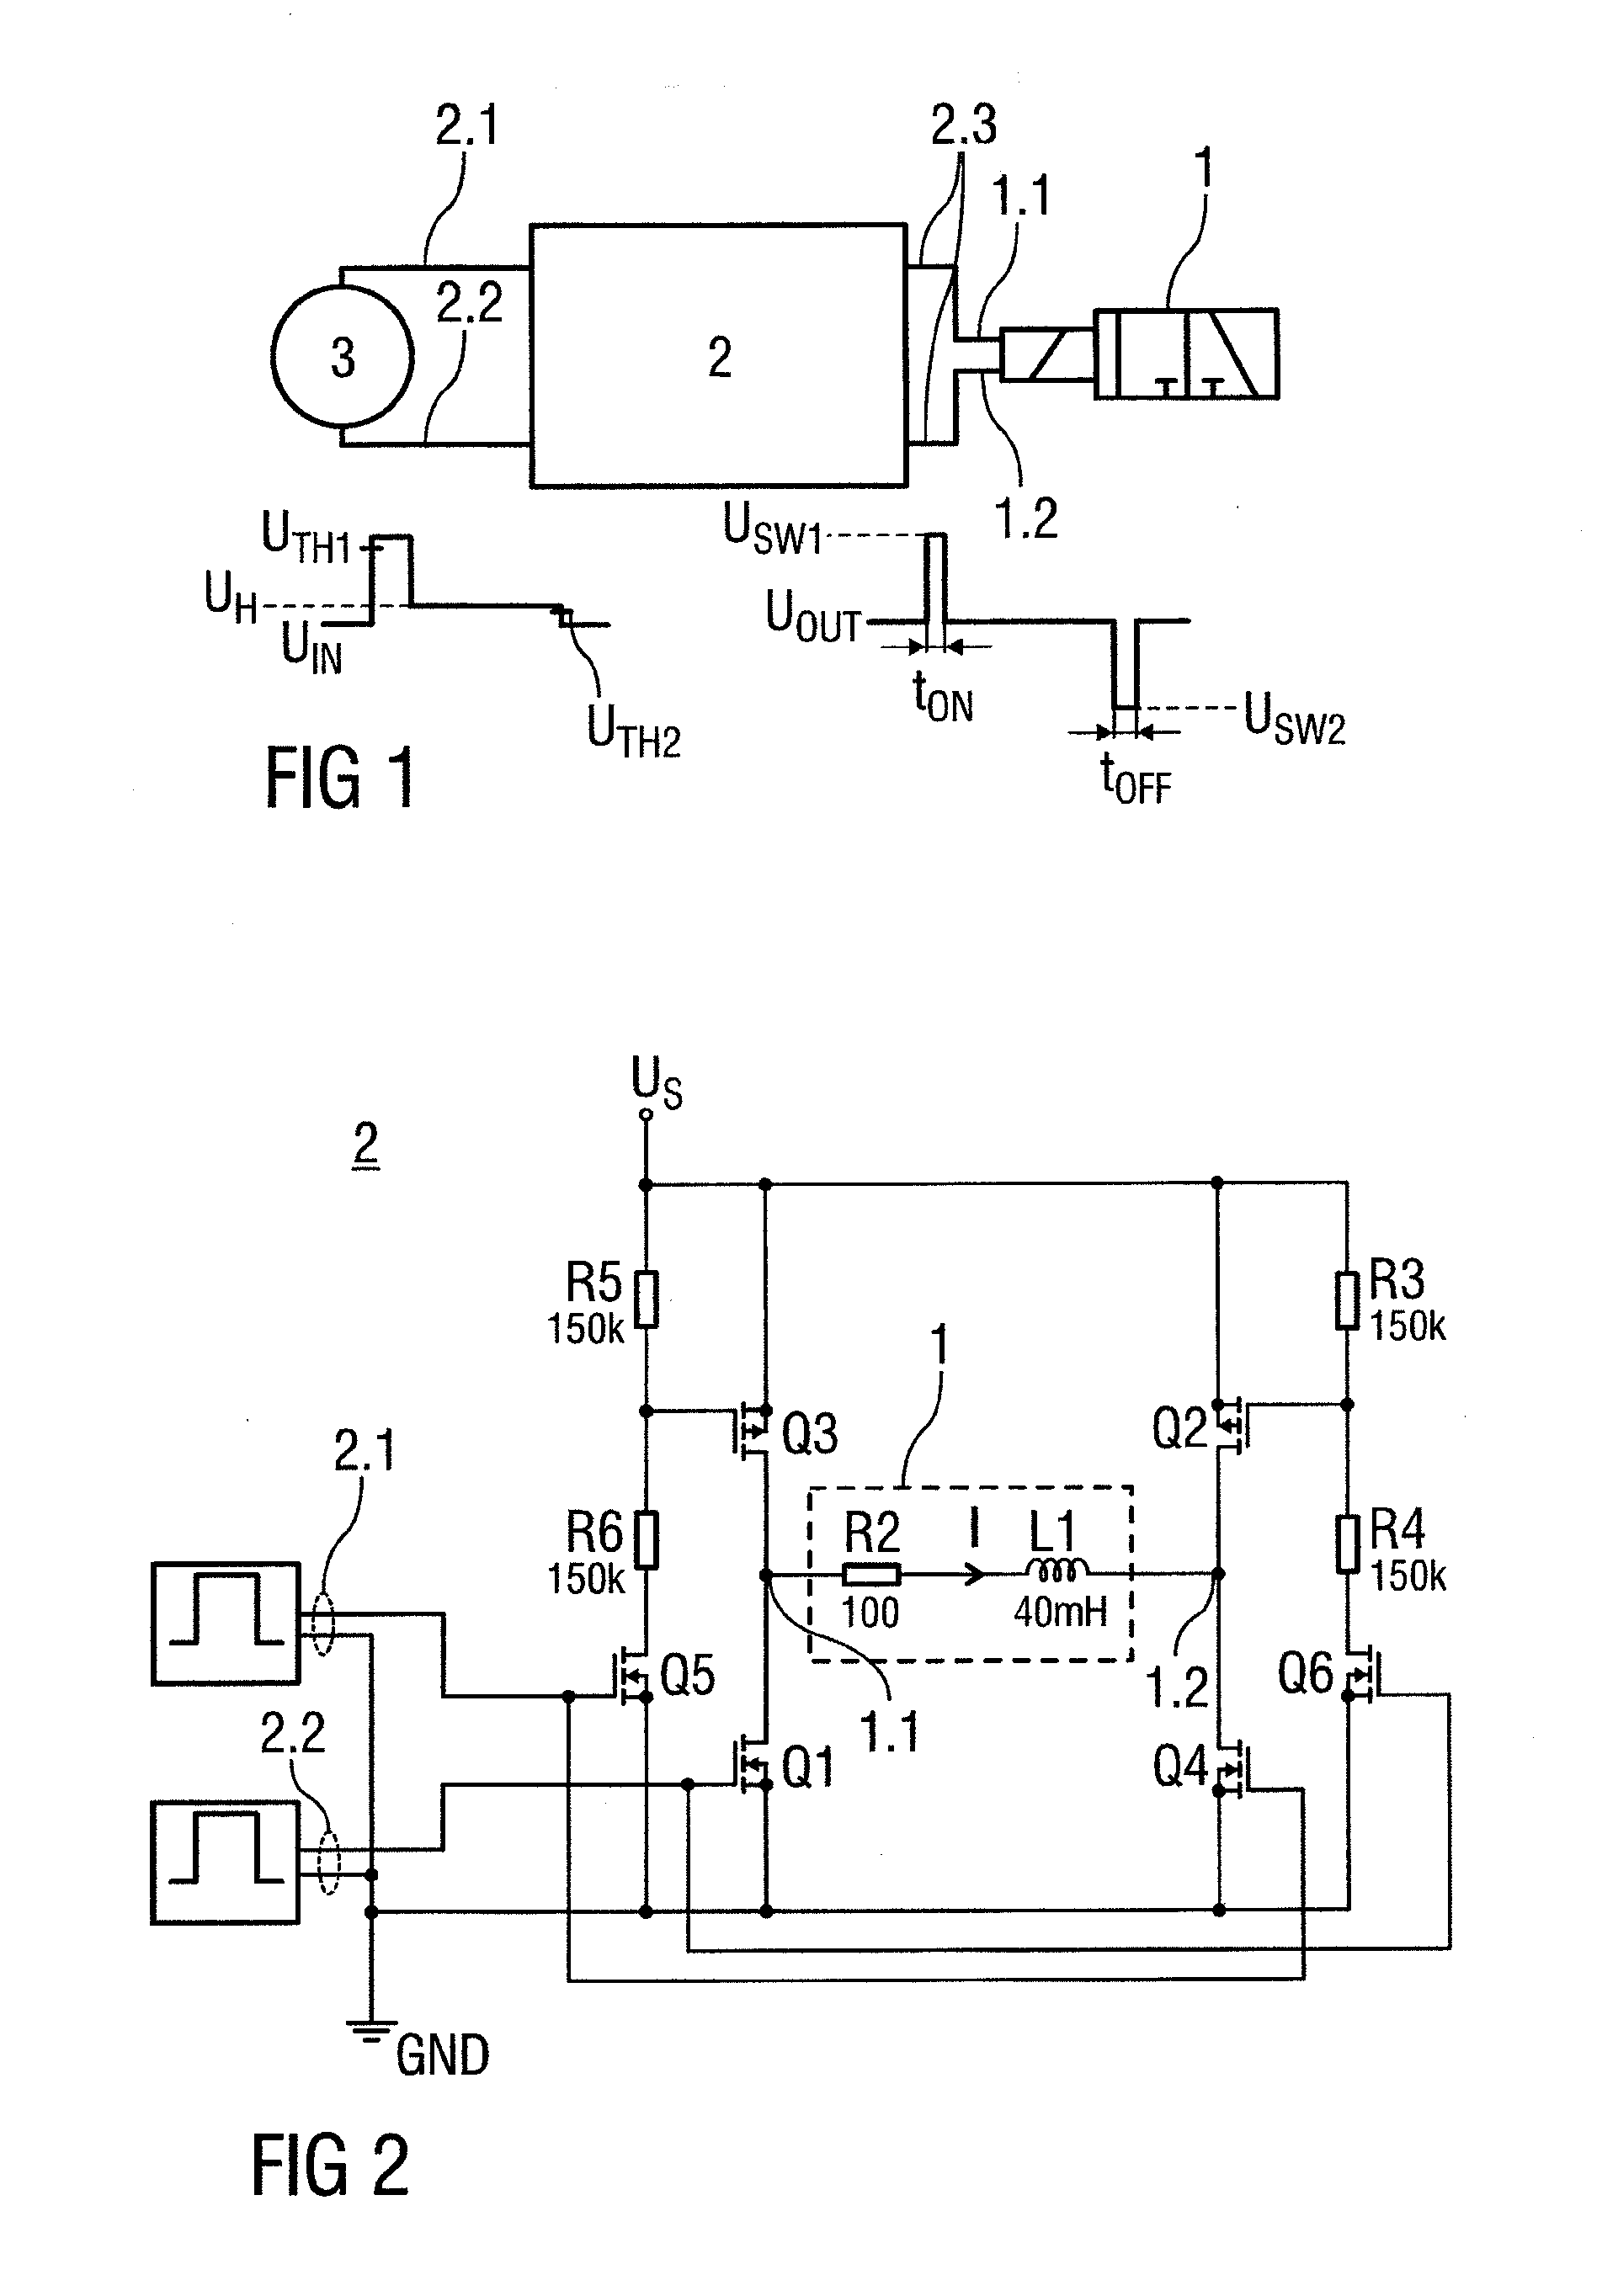 Electronic adapter for controlling a bistable valve